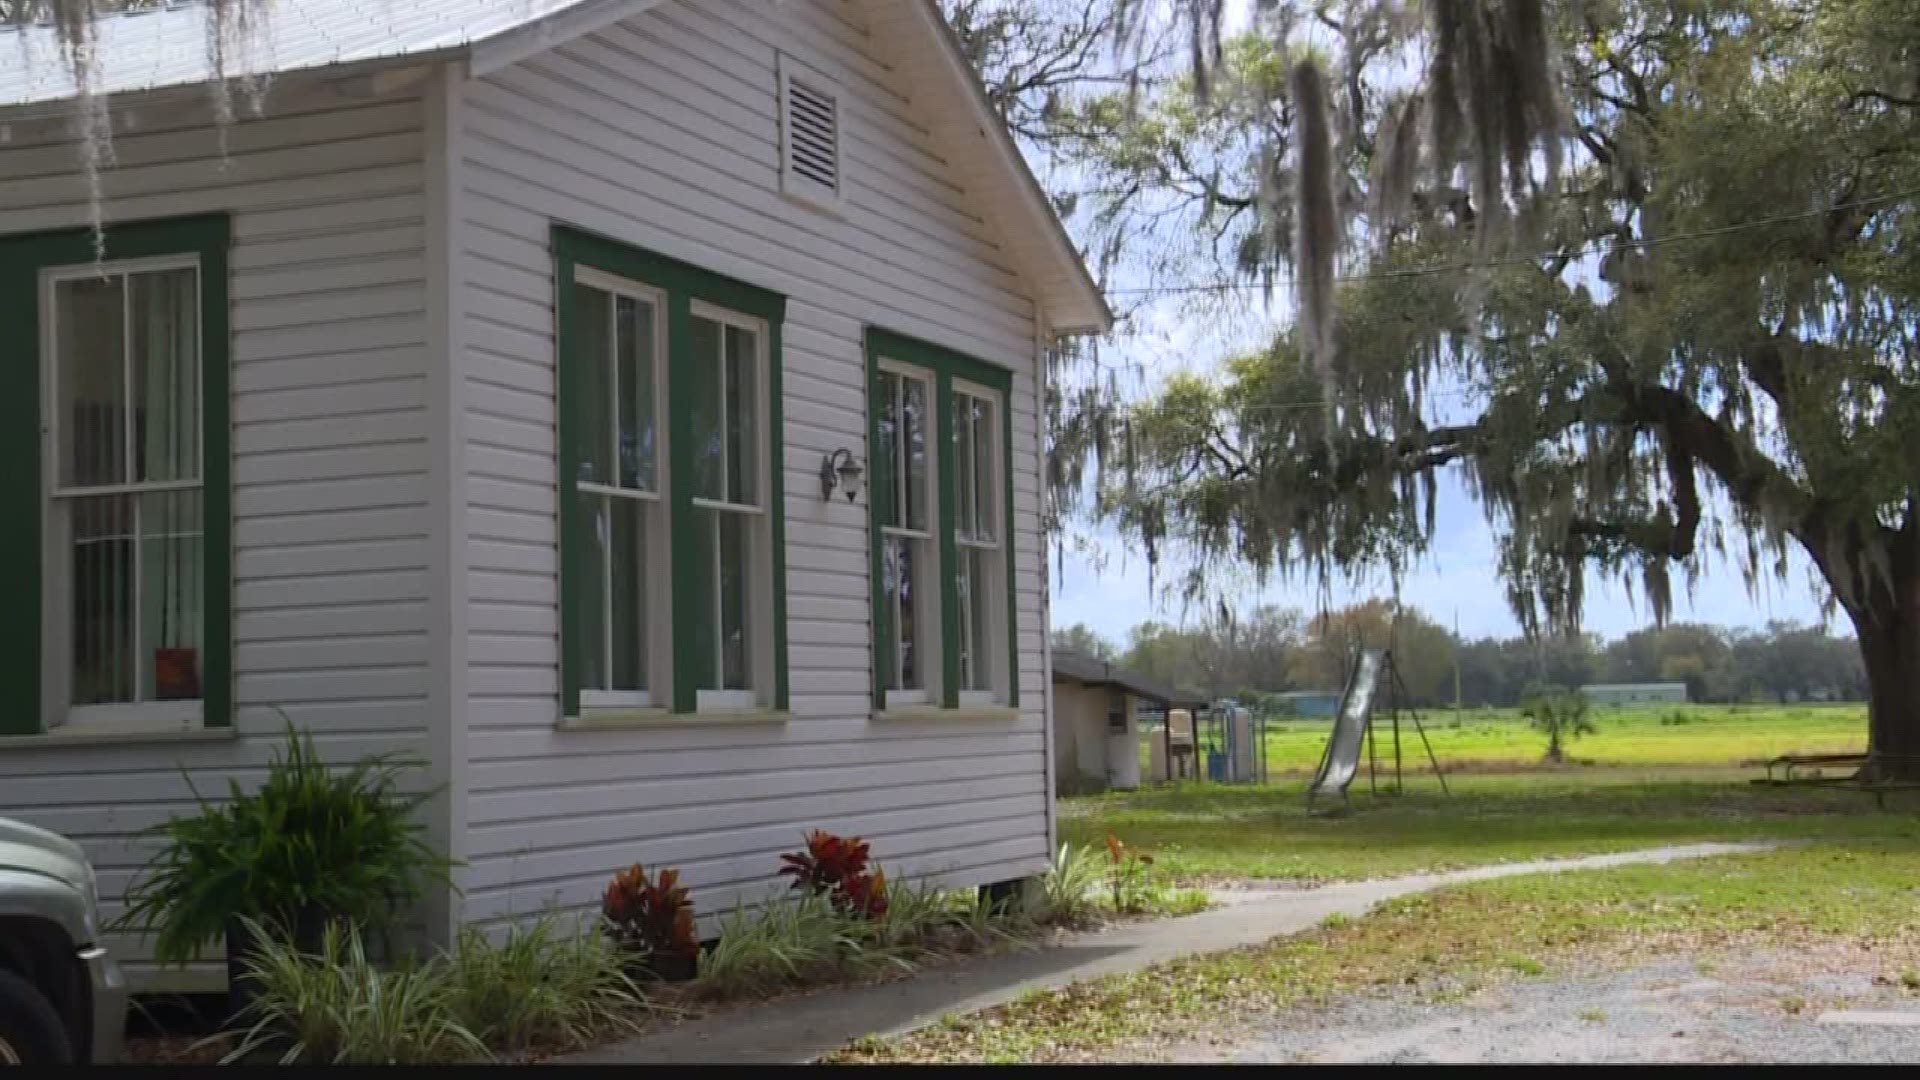 Tucked away in a quiet community near Plant City, where the Spanish moss hangs gently from the trees and buildings are a reminder of an era long past, the hidden history of Bealsville lives on.